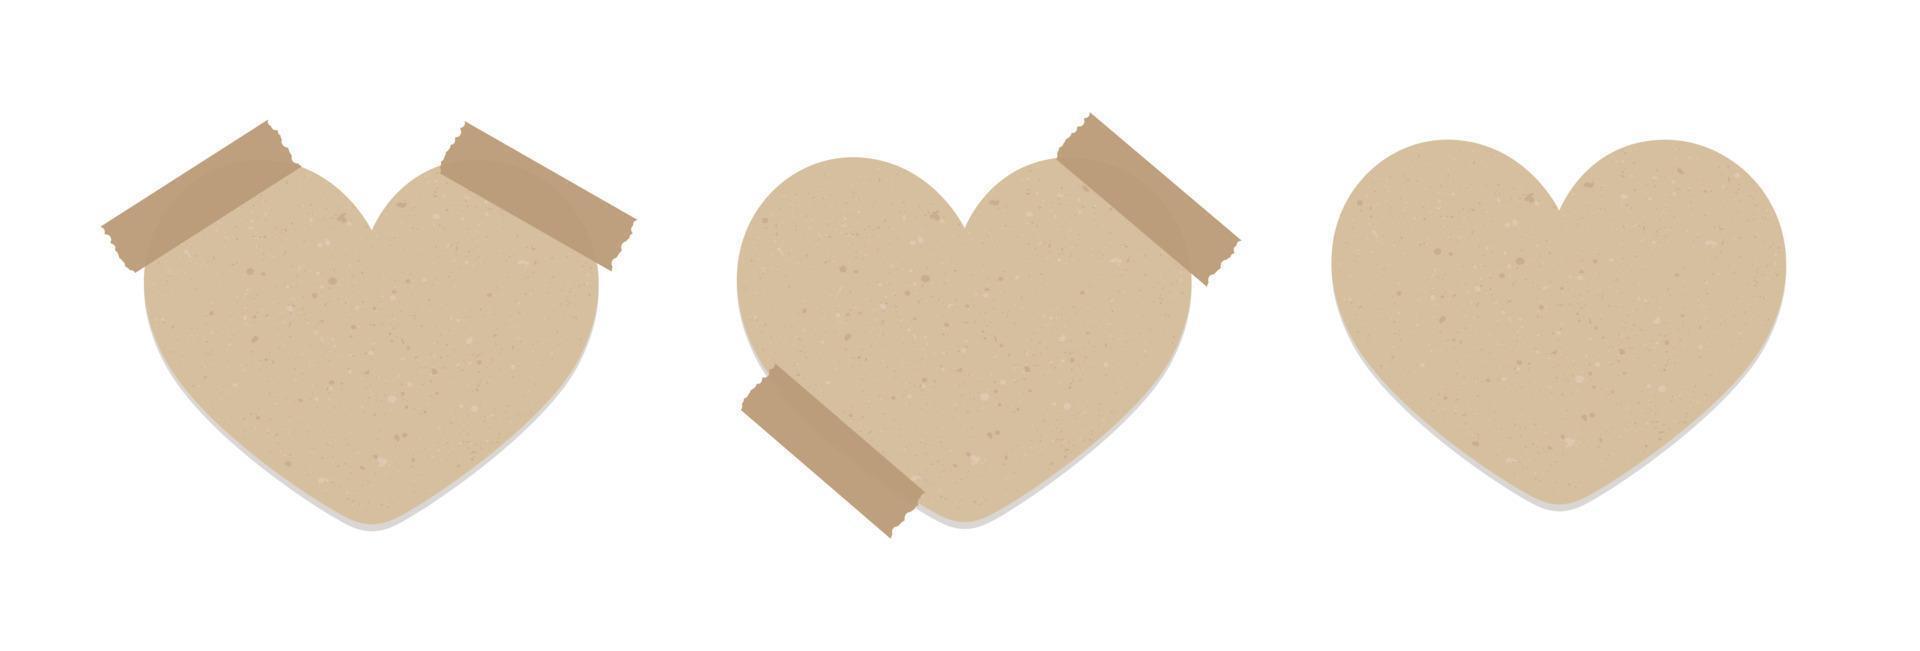 Vintage heart shape brown paper note set. Valentines day theme memo paper with adhesive tape. vector